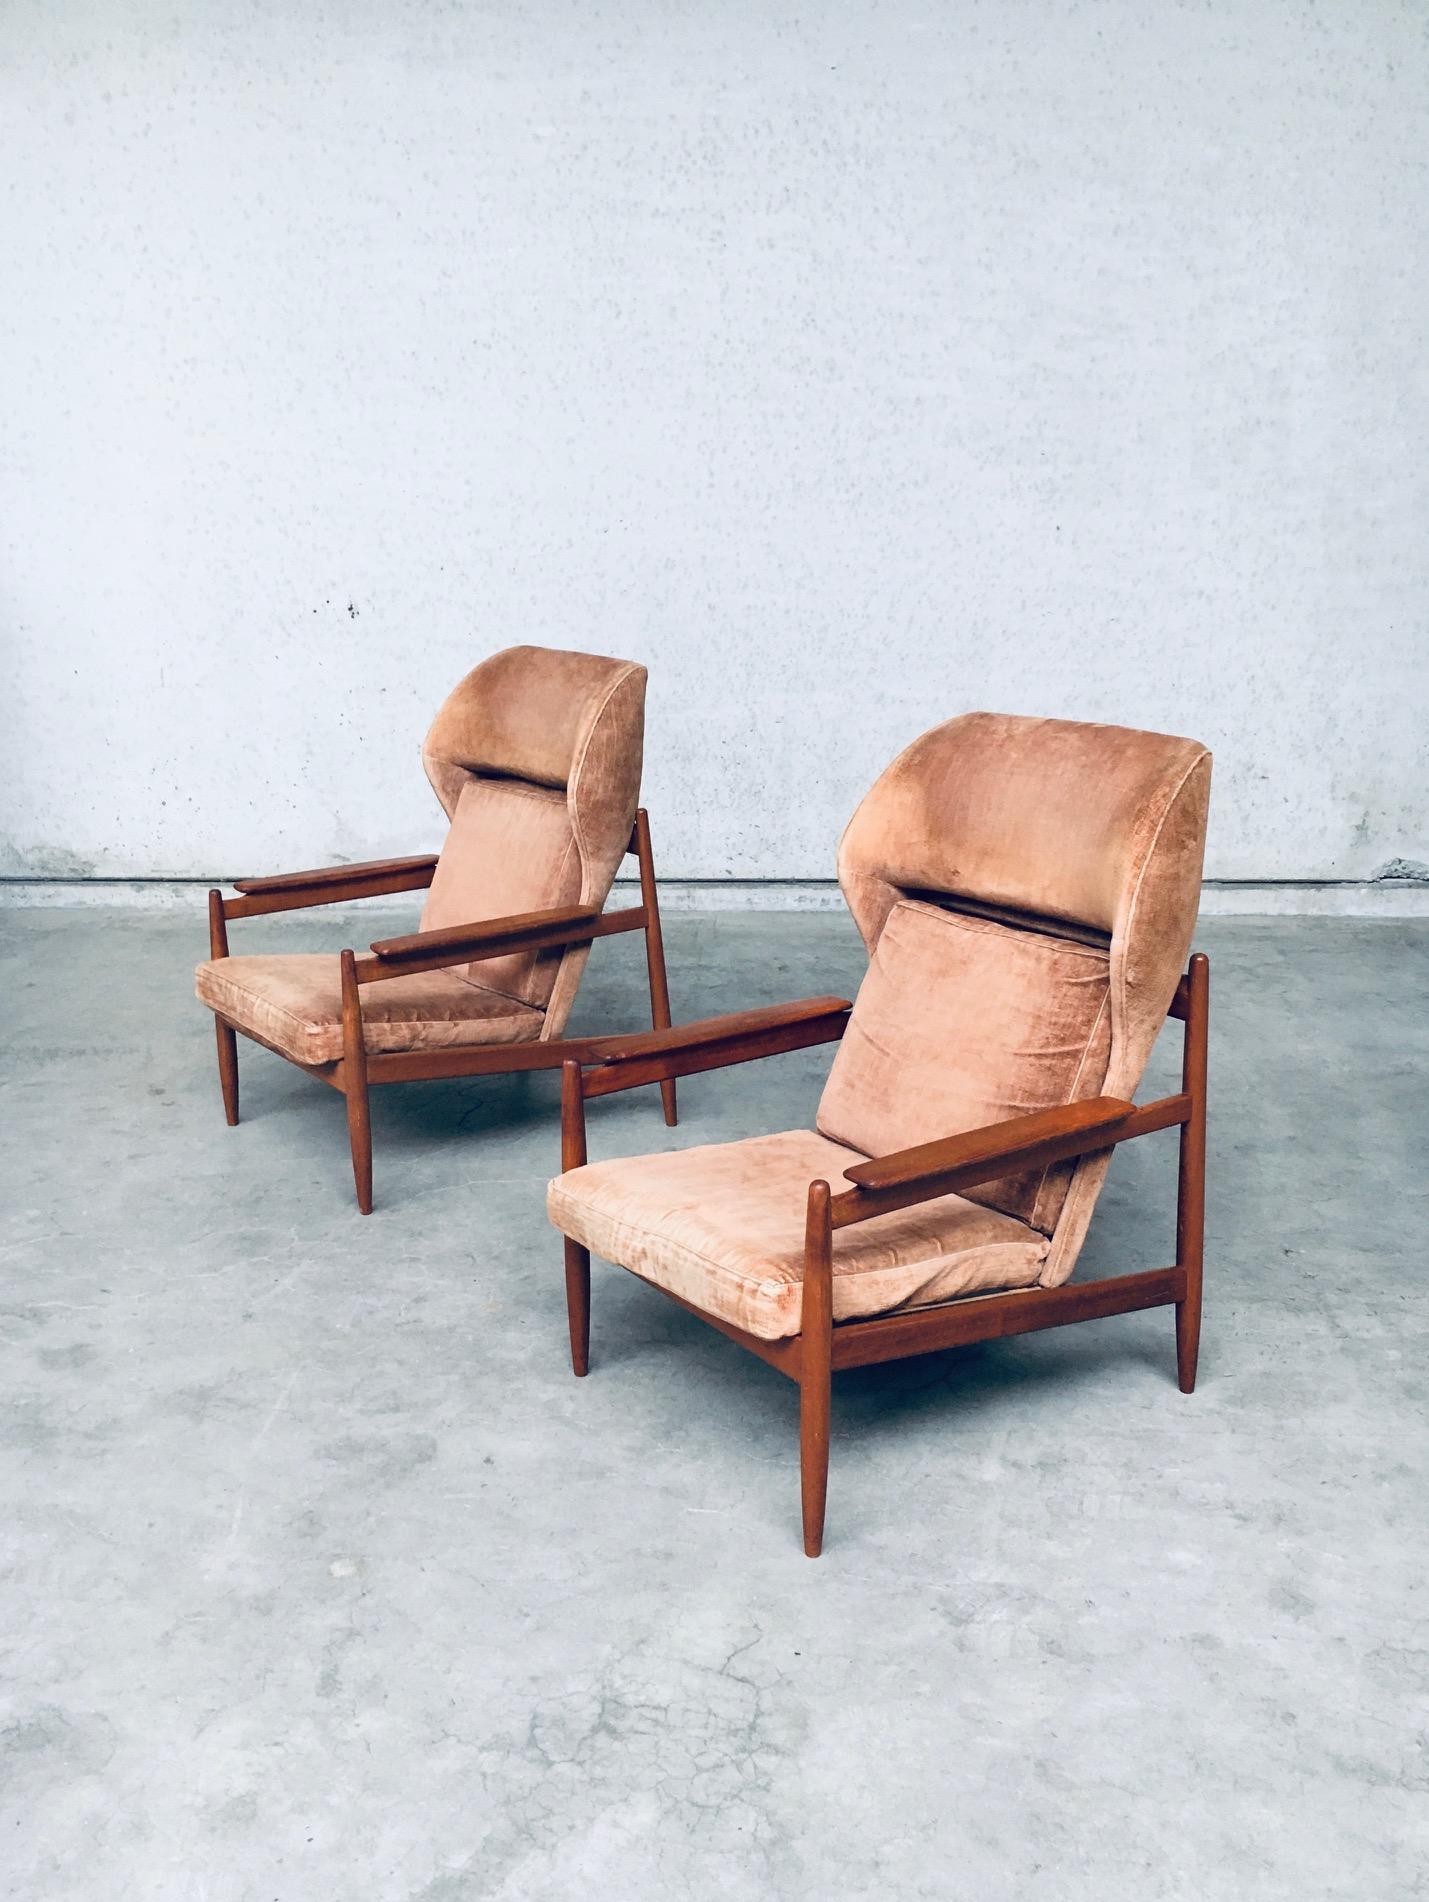 Vintage Mid-Century Modern Scandinavian Design wingback Lounge Chair set of 2. Made in Denmark, Kopenhagen, 1960s. Rare set of armchairs. No maker markings or references found. Teak wood frame with pale brown sturdy fabric covers. All original and